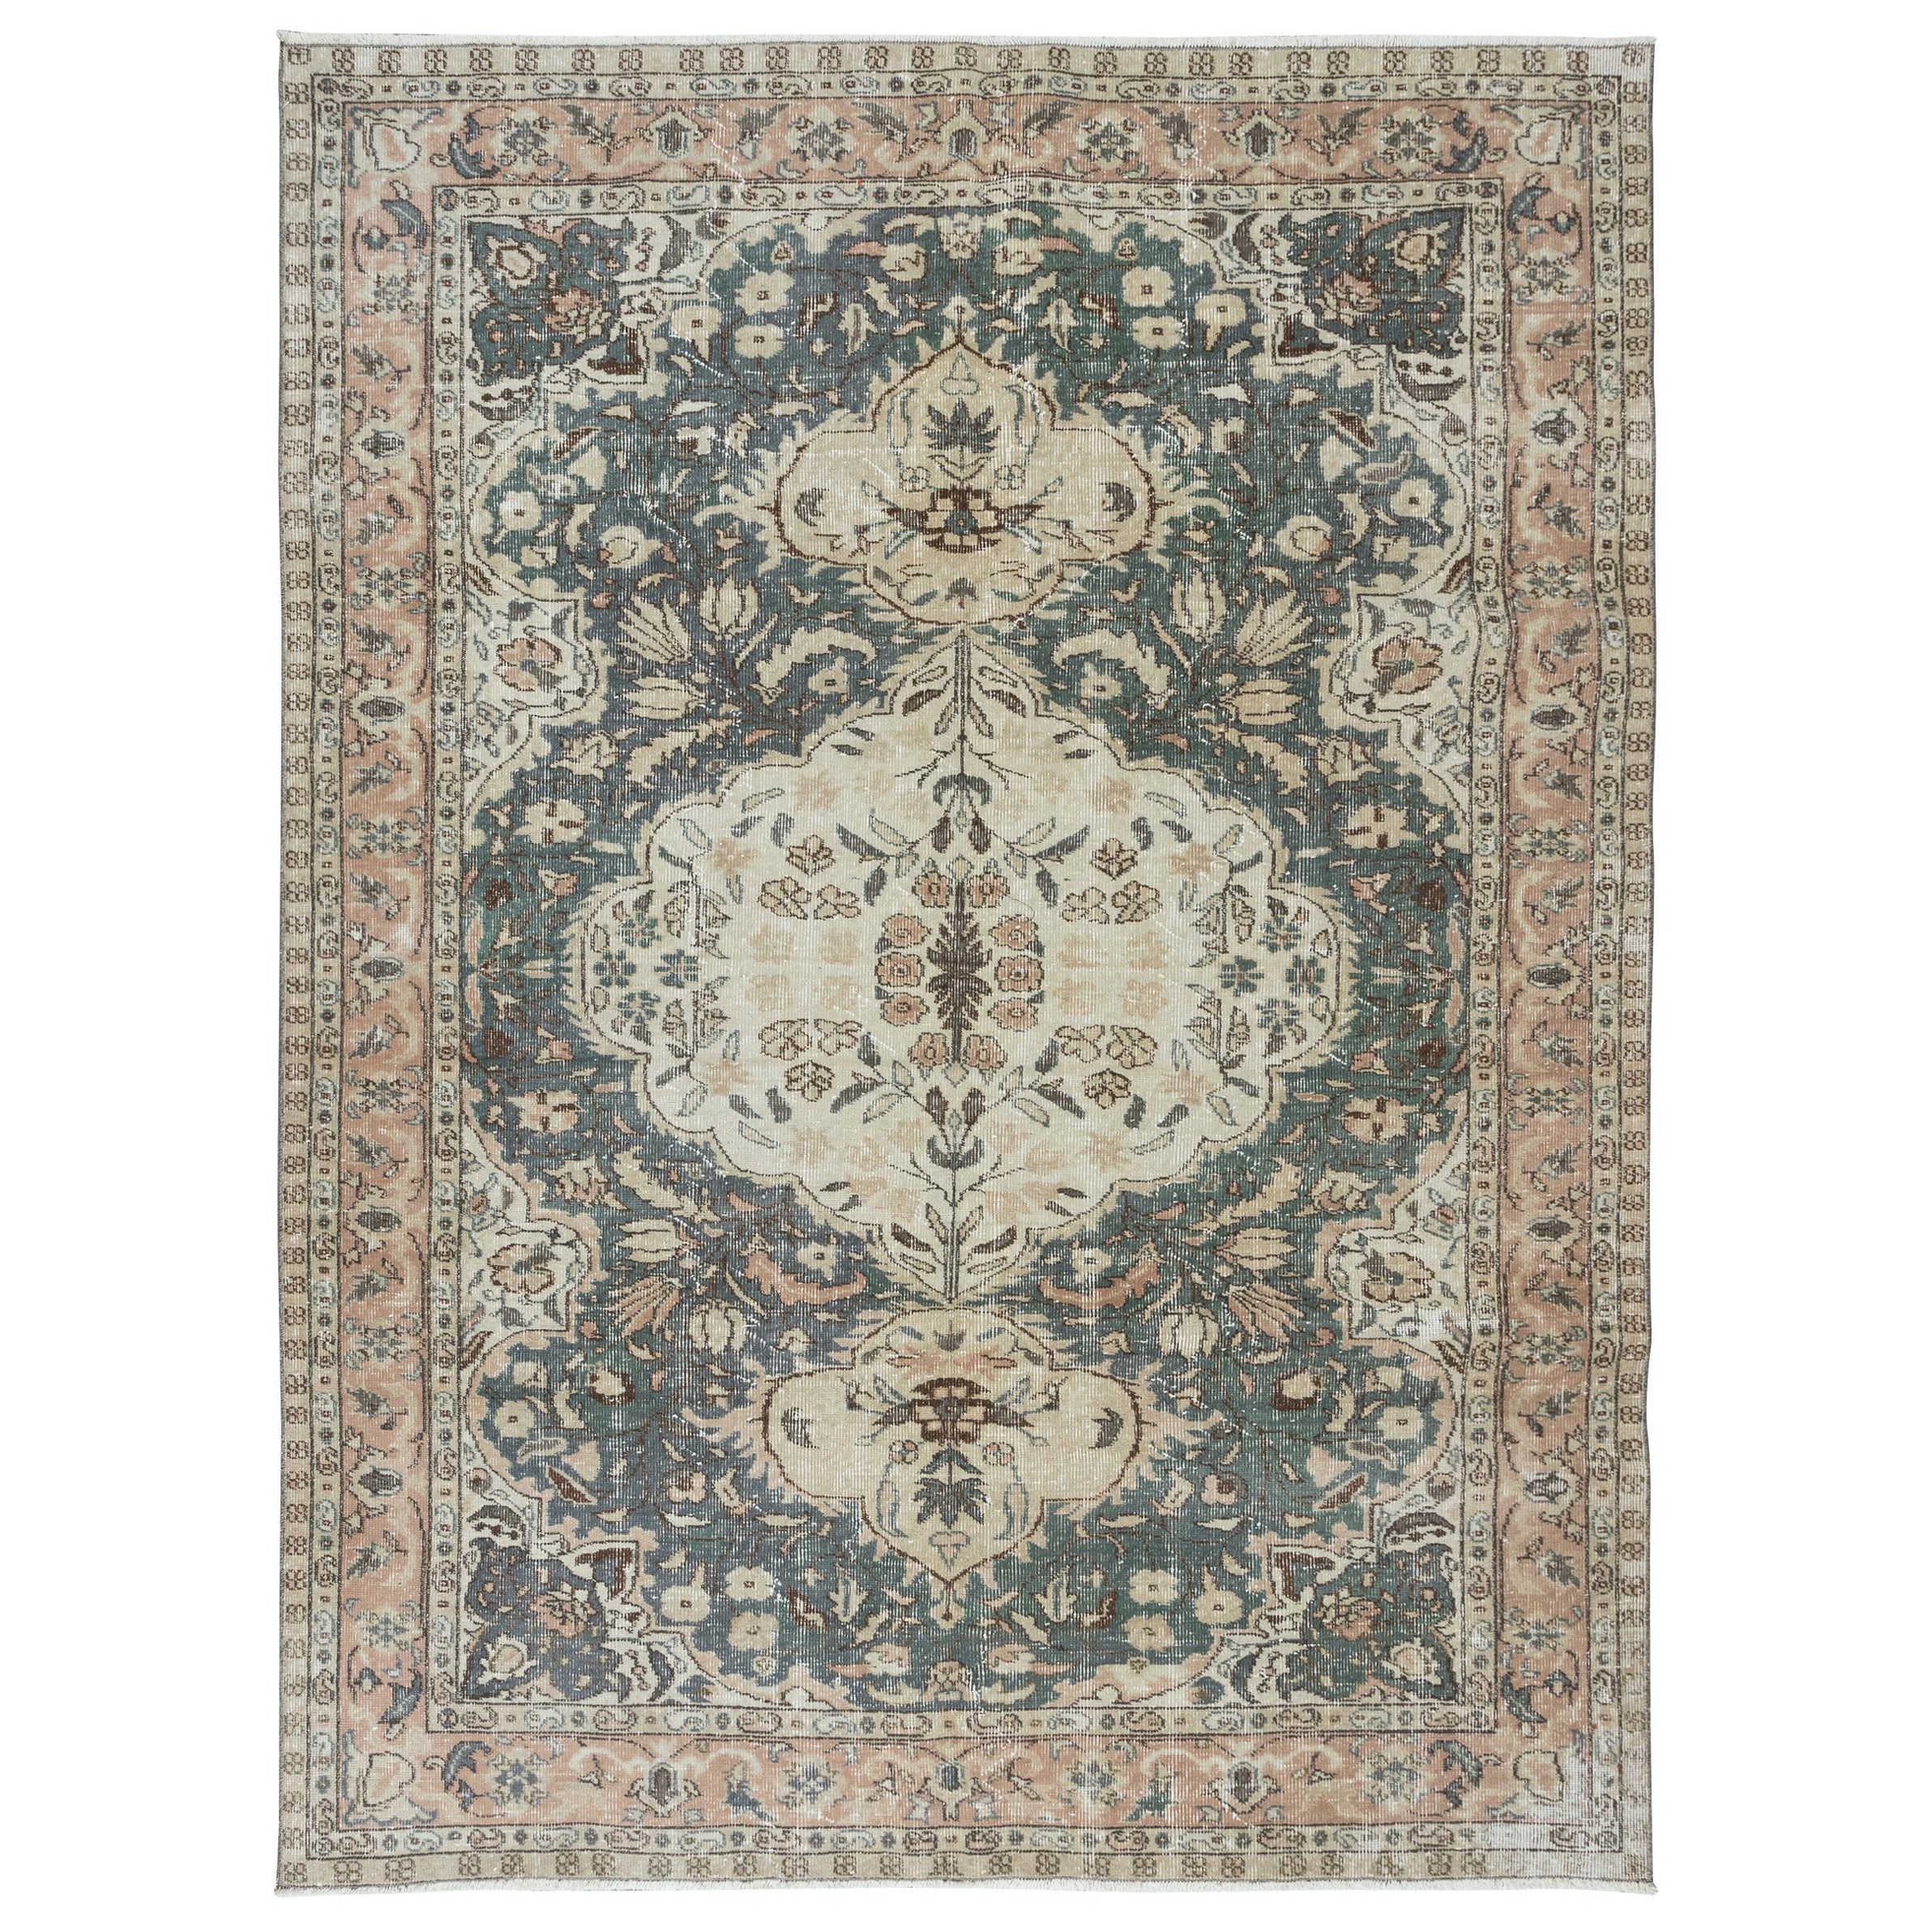 6.3x8.5 Ft One of a Kind Handmade Vintage Area Rug, Traditional Turkish Carpet For Sale